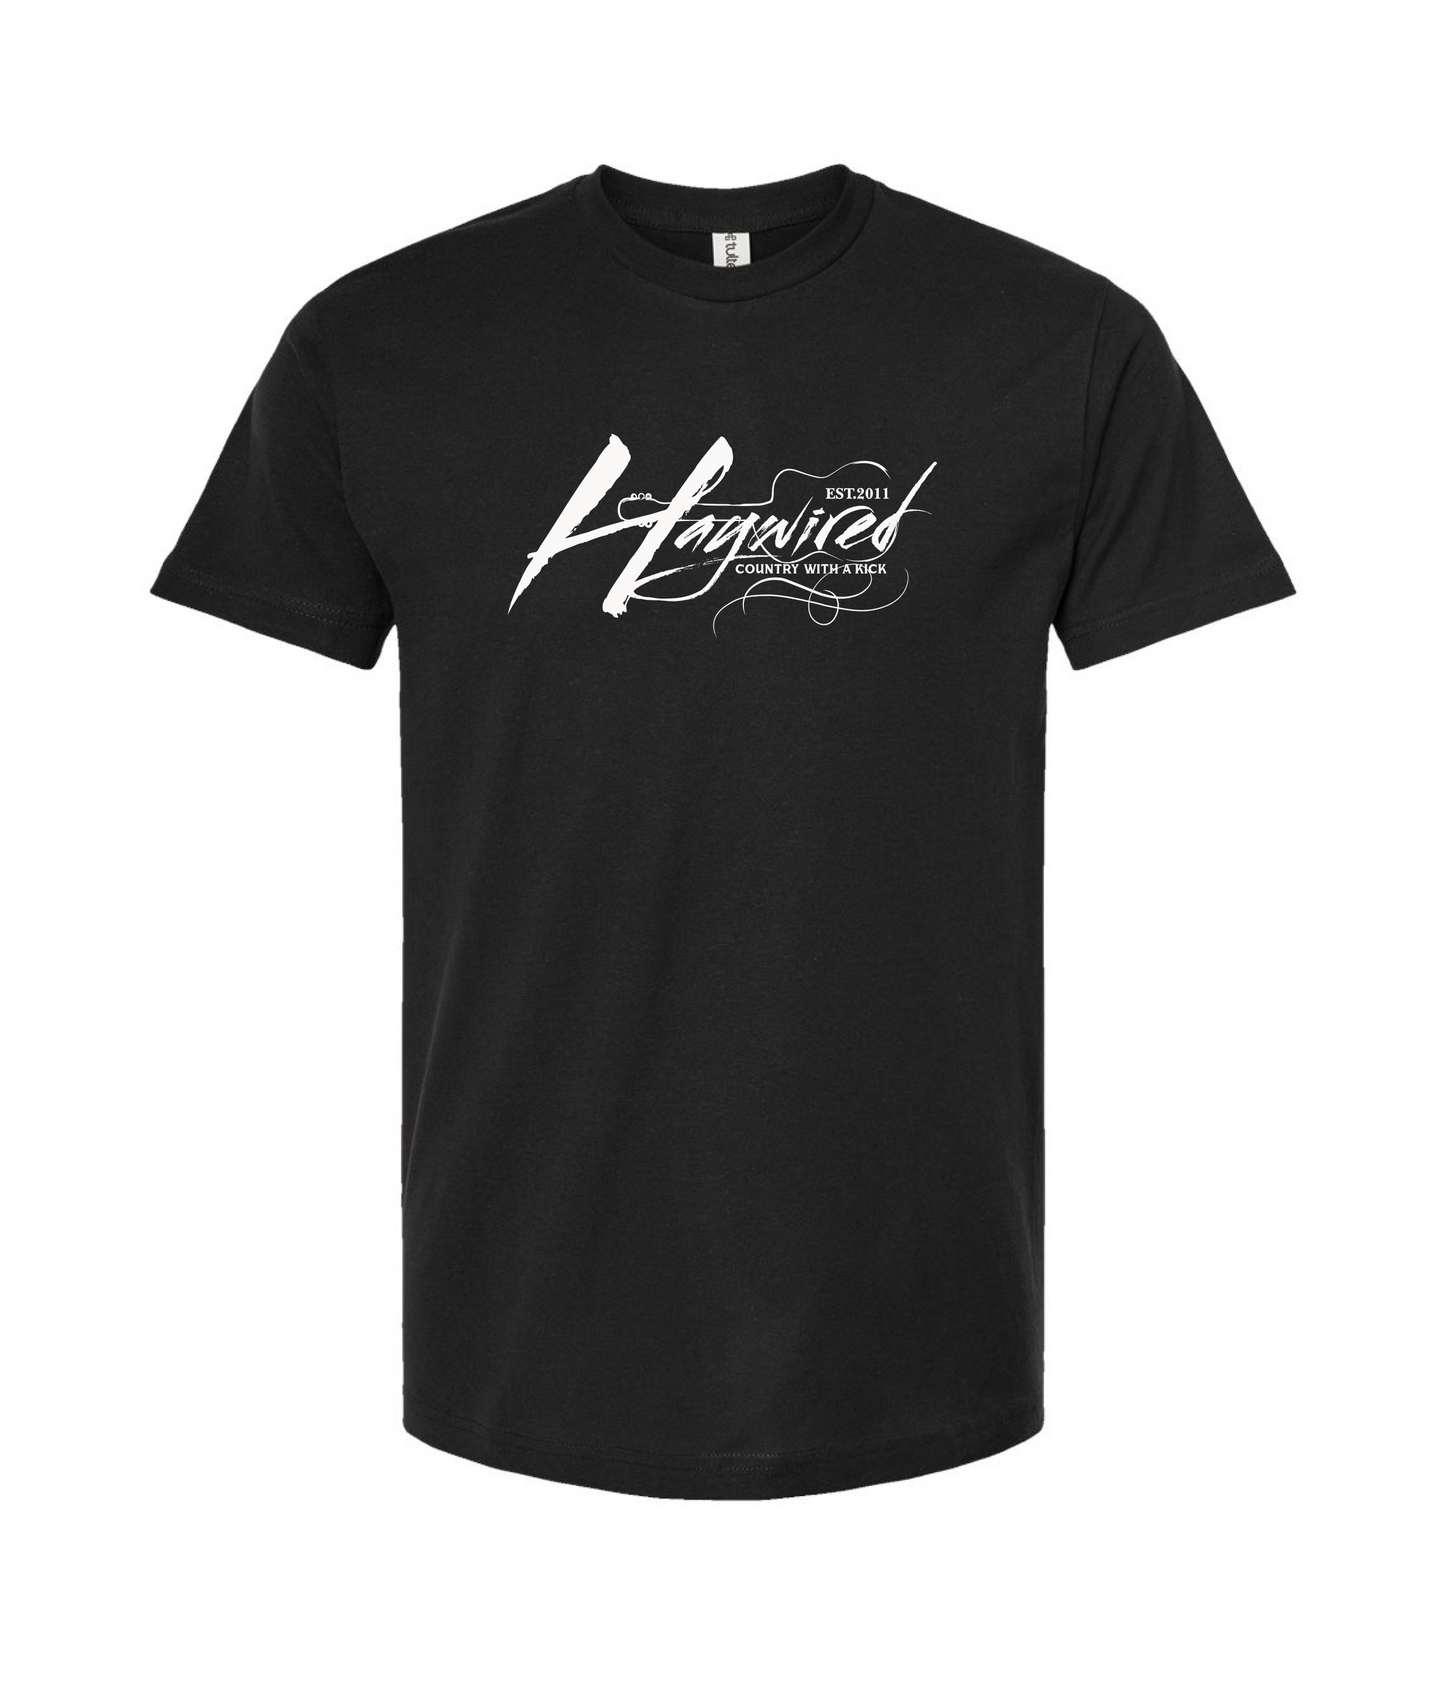 Haywired - Country With a Kick Logo - Black T-Shirt